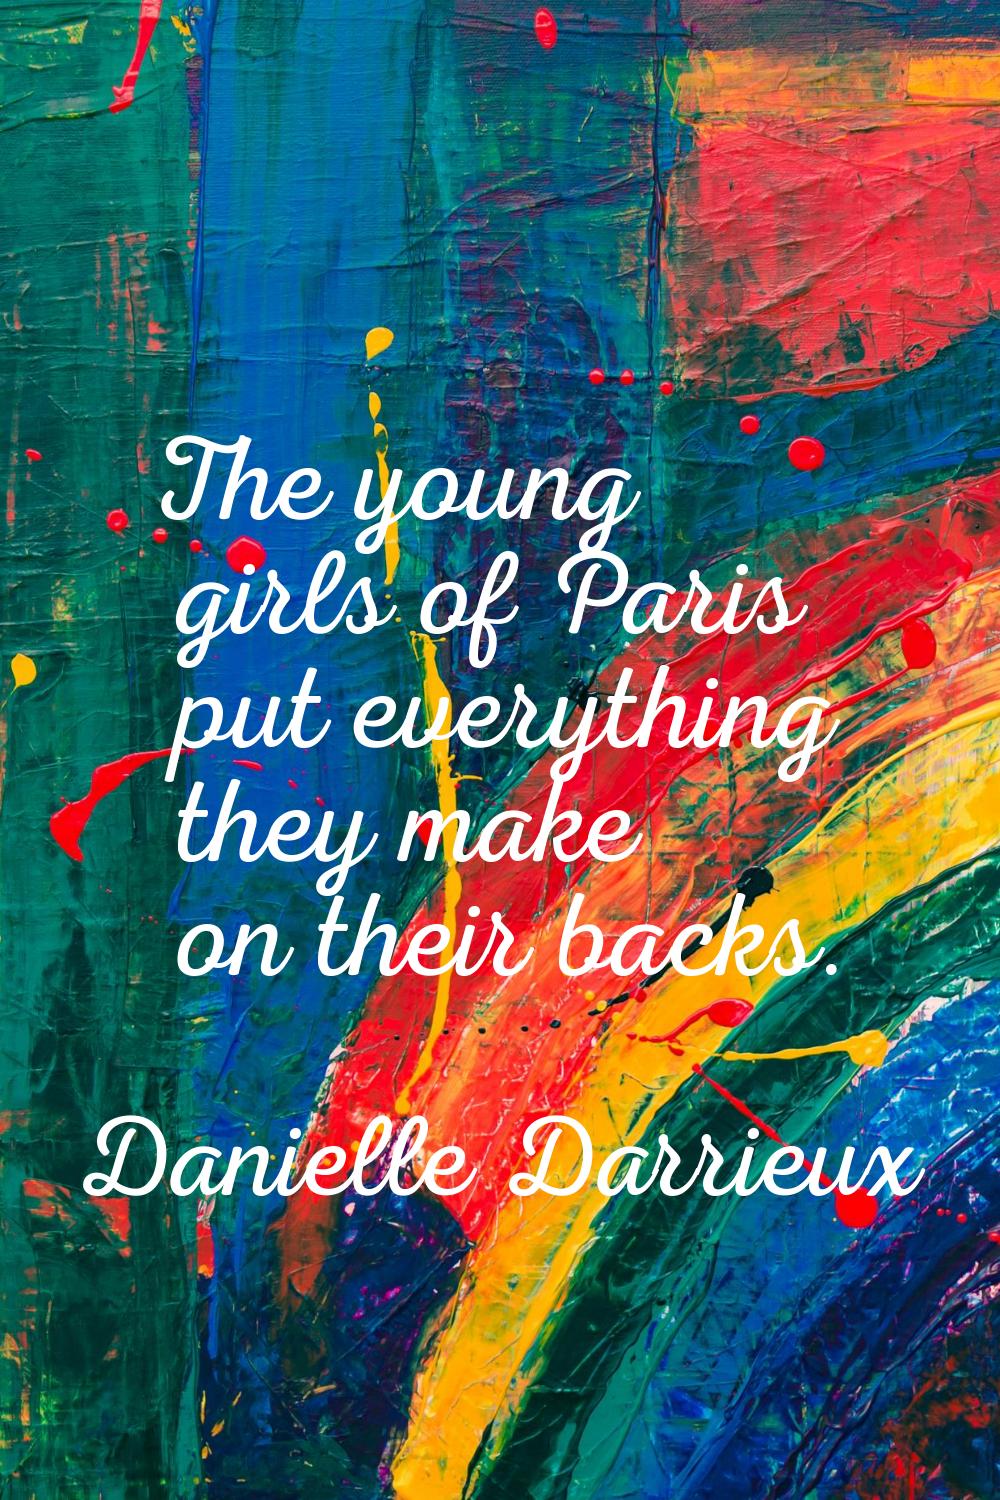 The young girls of Paris put everything they make on their backs.